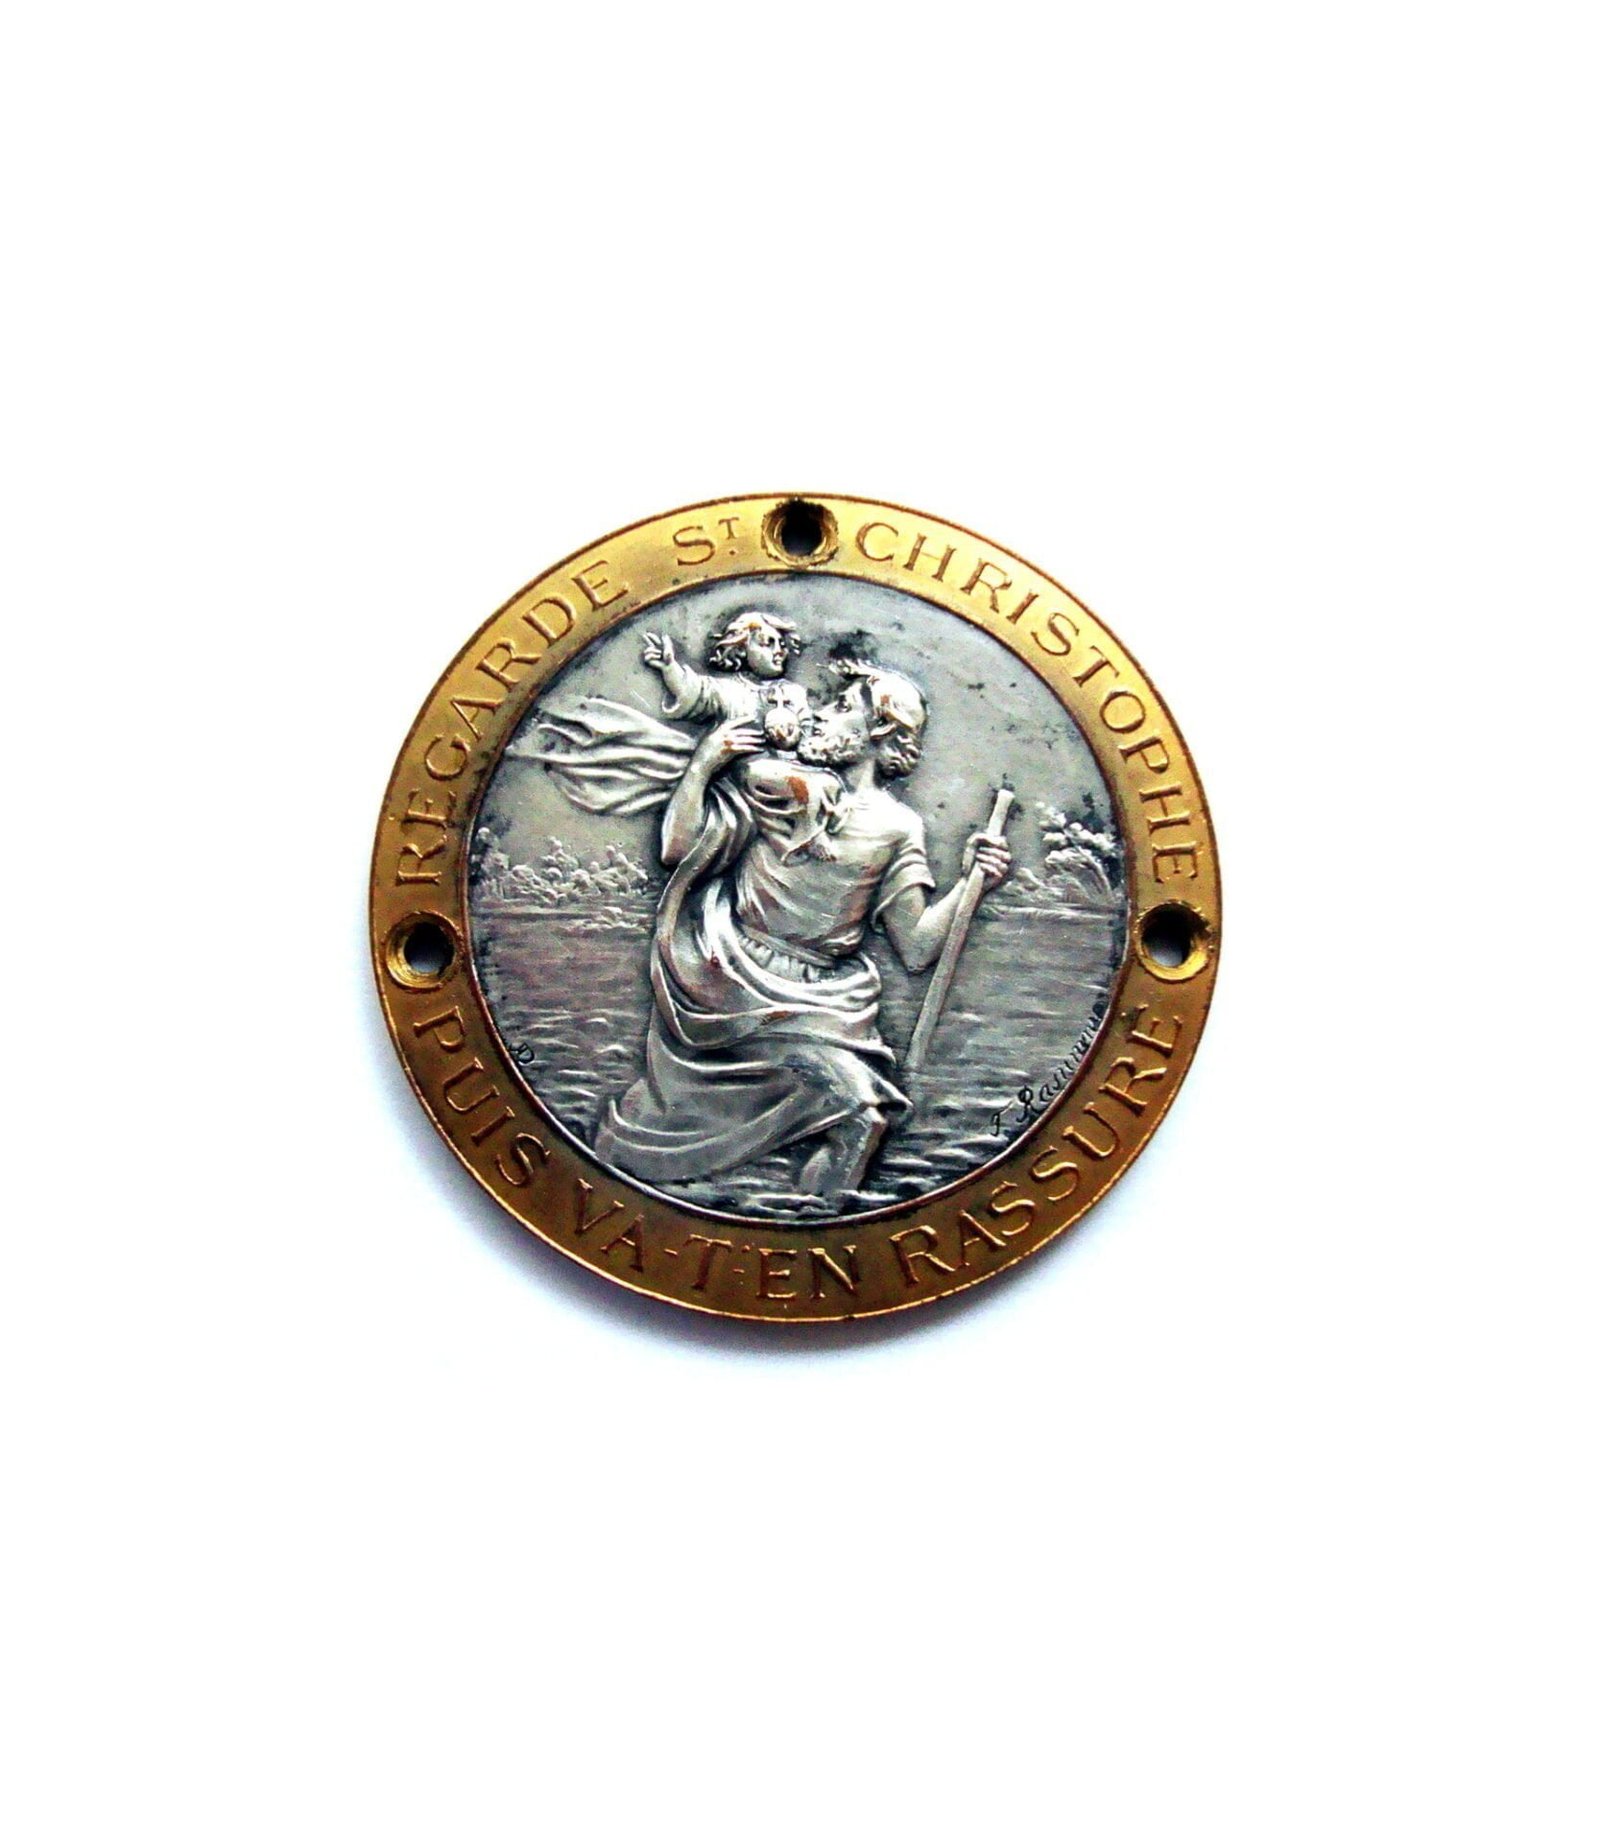 Round Saint Christopher dashboard badge, by master engraver Felix Rasumny (1869-1940). One of the most prolific engravers in the universe of the dashboard badges. Diameter 45mm. Silver plated bronze with patinated borders. Signed by the artist. This is the exact badge photographed and described in the book by Maximiliano Garay " Saint Christophe - dashboard badges of the golden era of motoring " on page 128. 